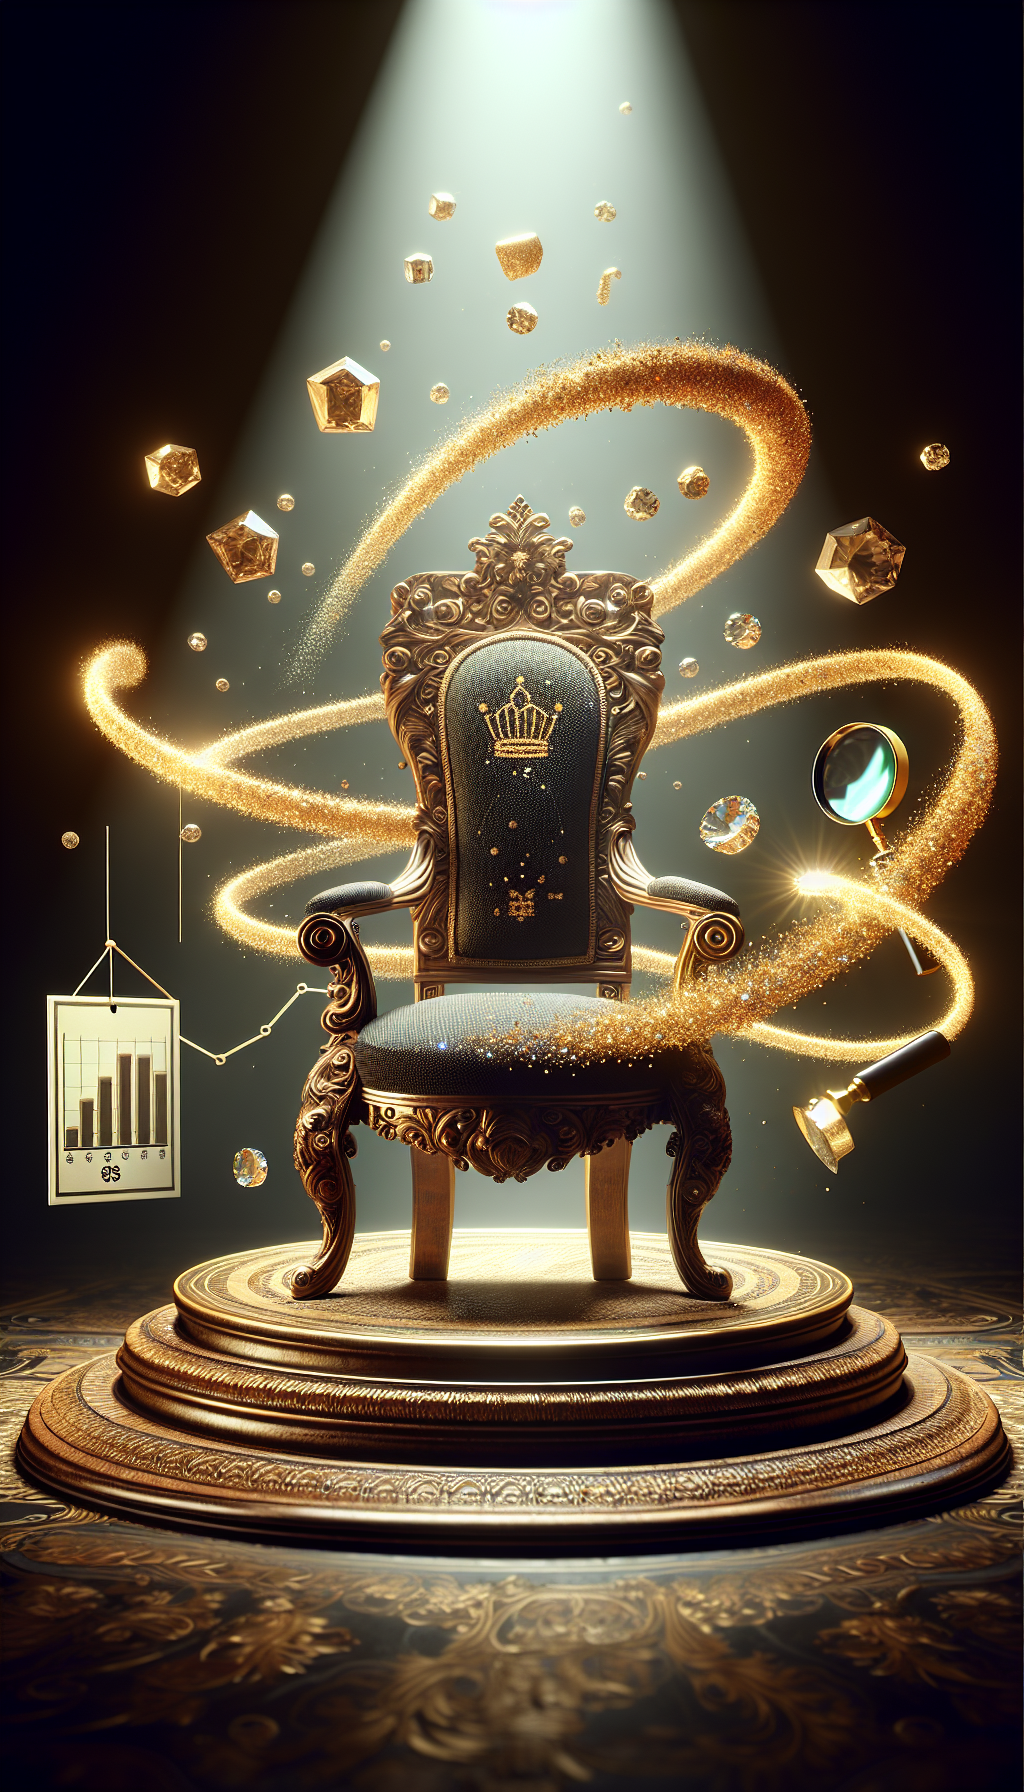 An opulent, intricately carved antique chair stands spotlighted atop a regal pedestal, with shimmering gold dust spiraling upward to form rare gemstones and a noble family crest, symbolizing provenance. A magnifying glass hovers beside, hinting at the meticulous scrutiny of authenticity, while a tag dangles off the chair with a soaring graph line indicating escalating value.